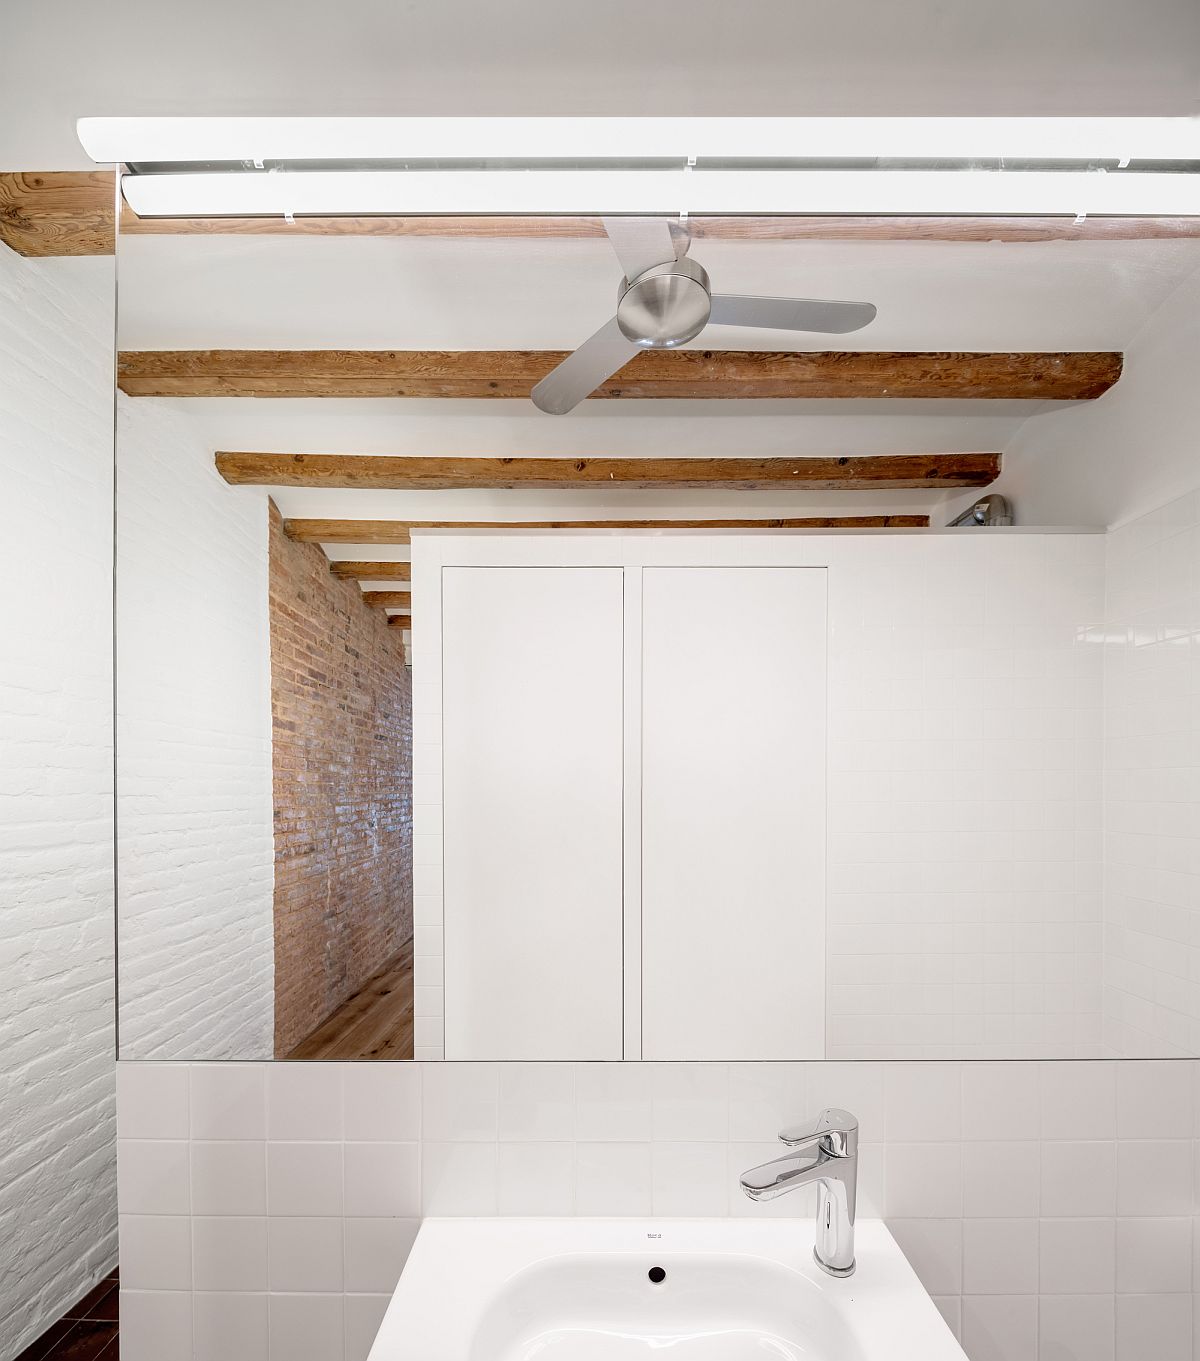 Modern-bathroom-and-WC-in-white-with-wooden-ceiling-beams-above